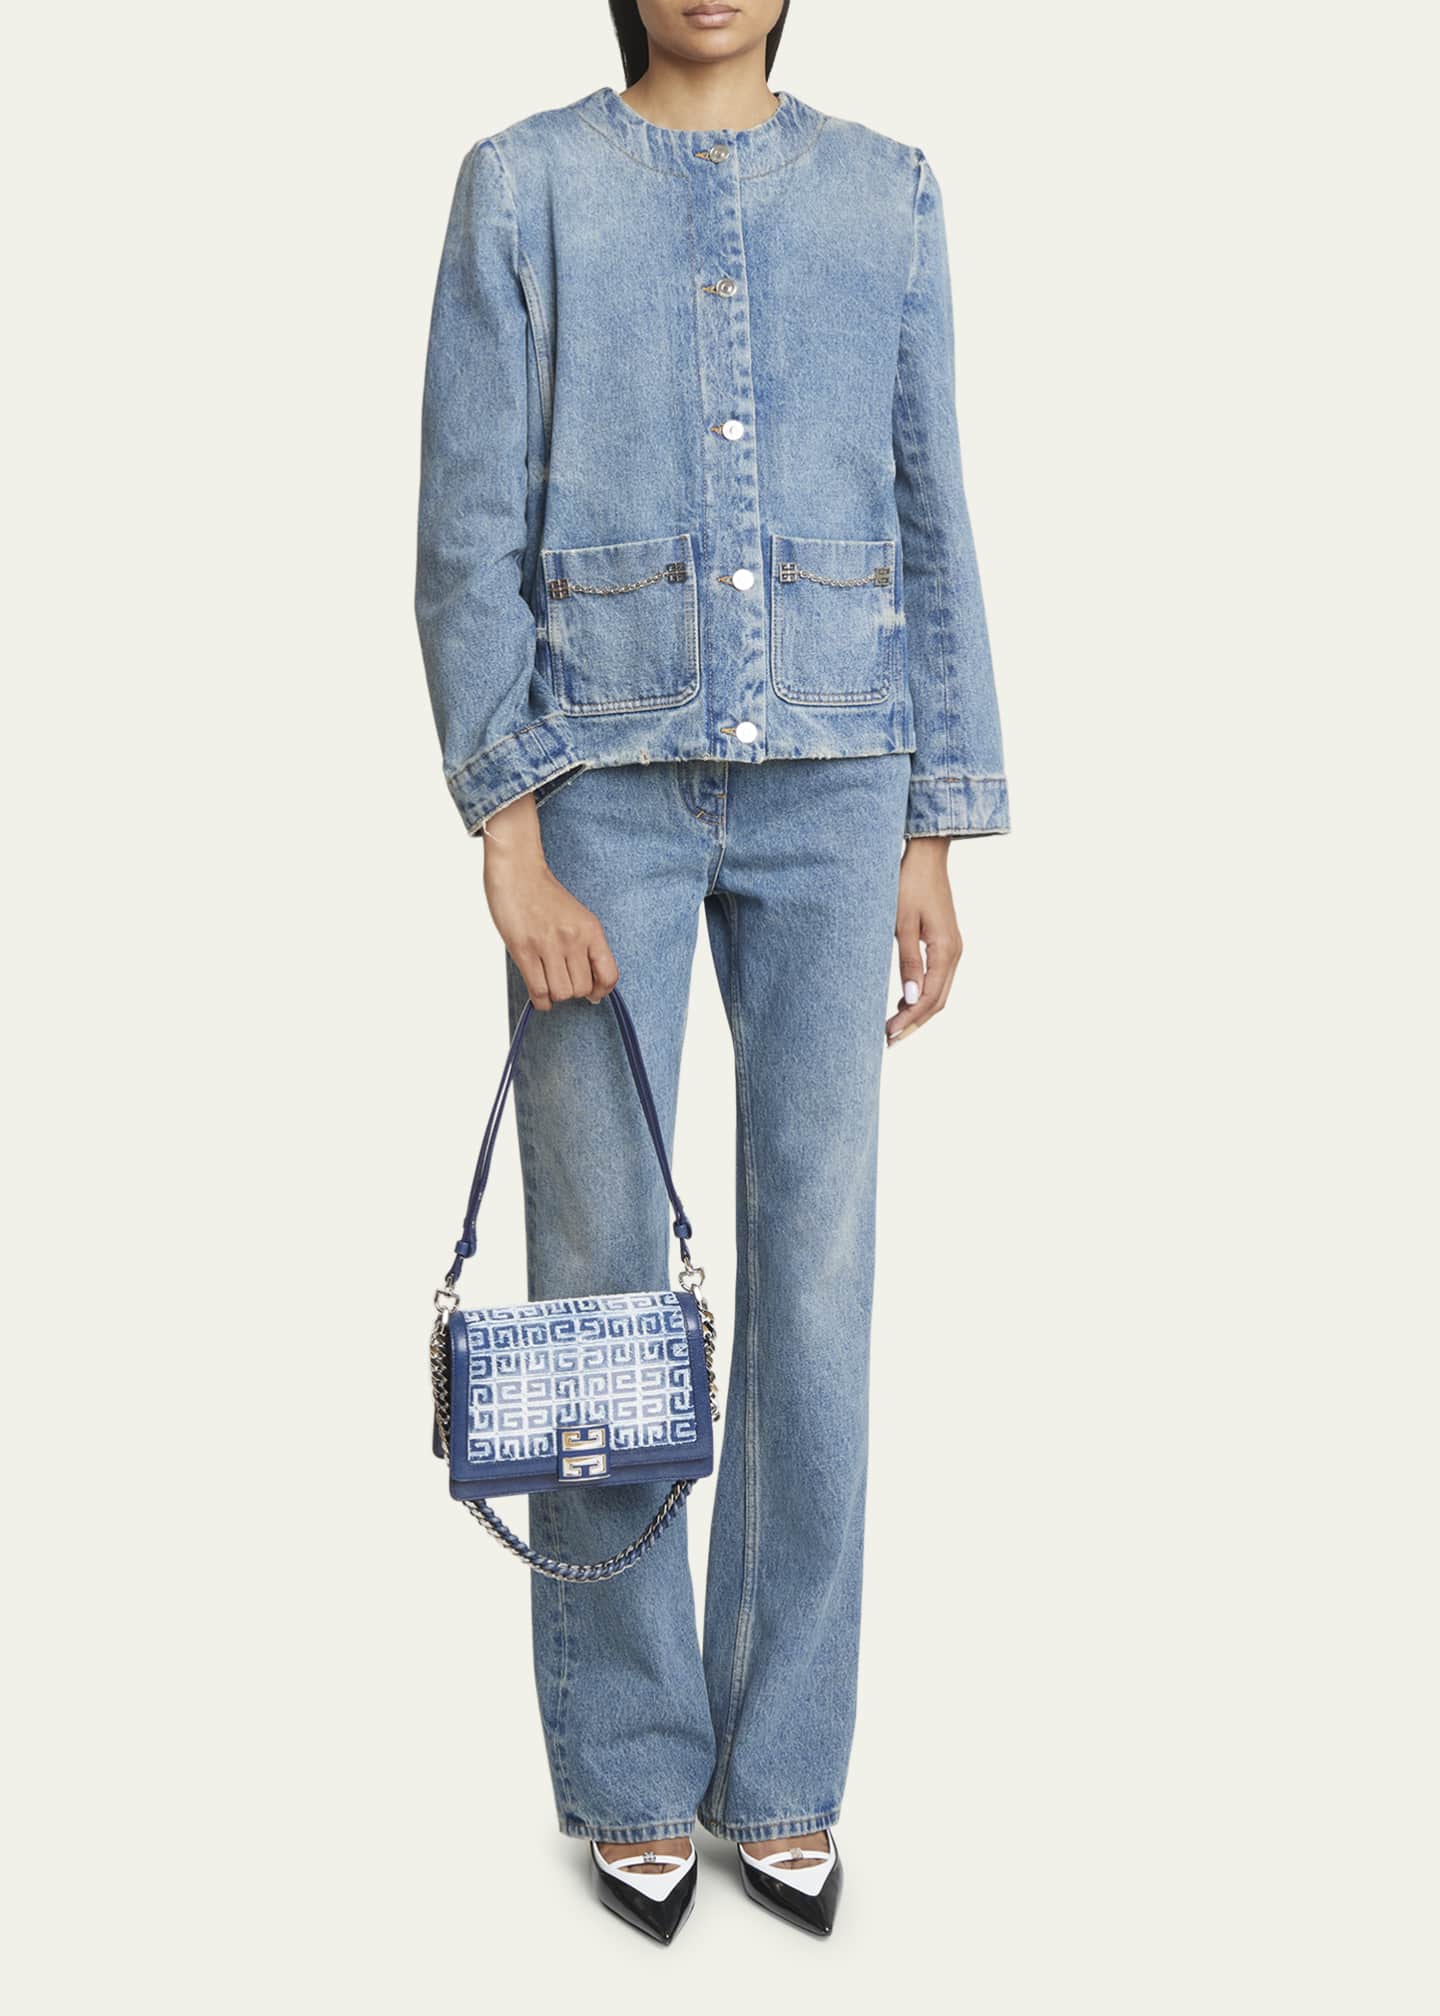 Givenchy 4G Shoulder Bag in Distressed Denim with Woven Chain Strap ...